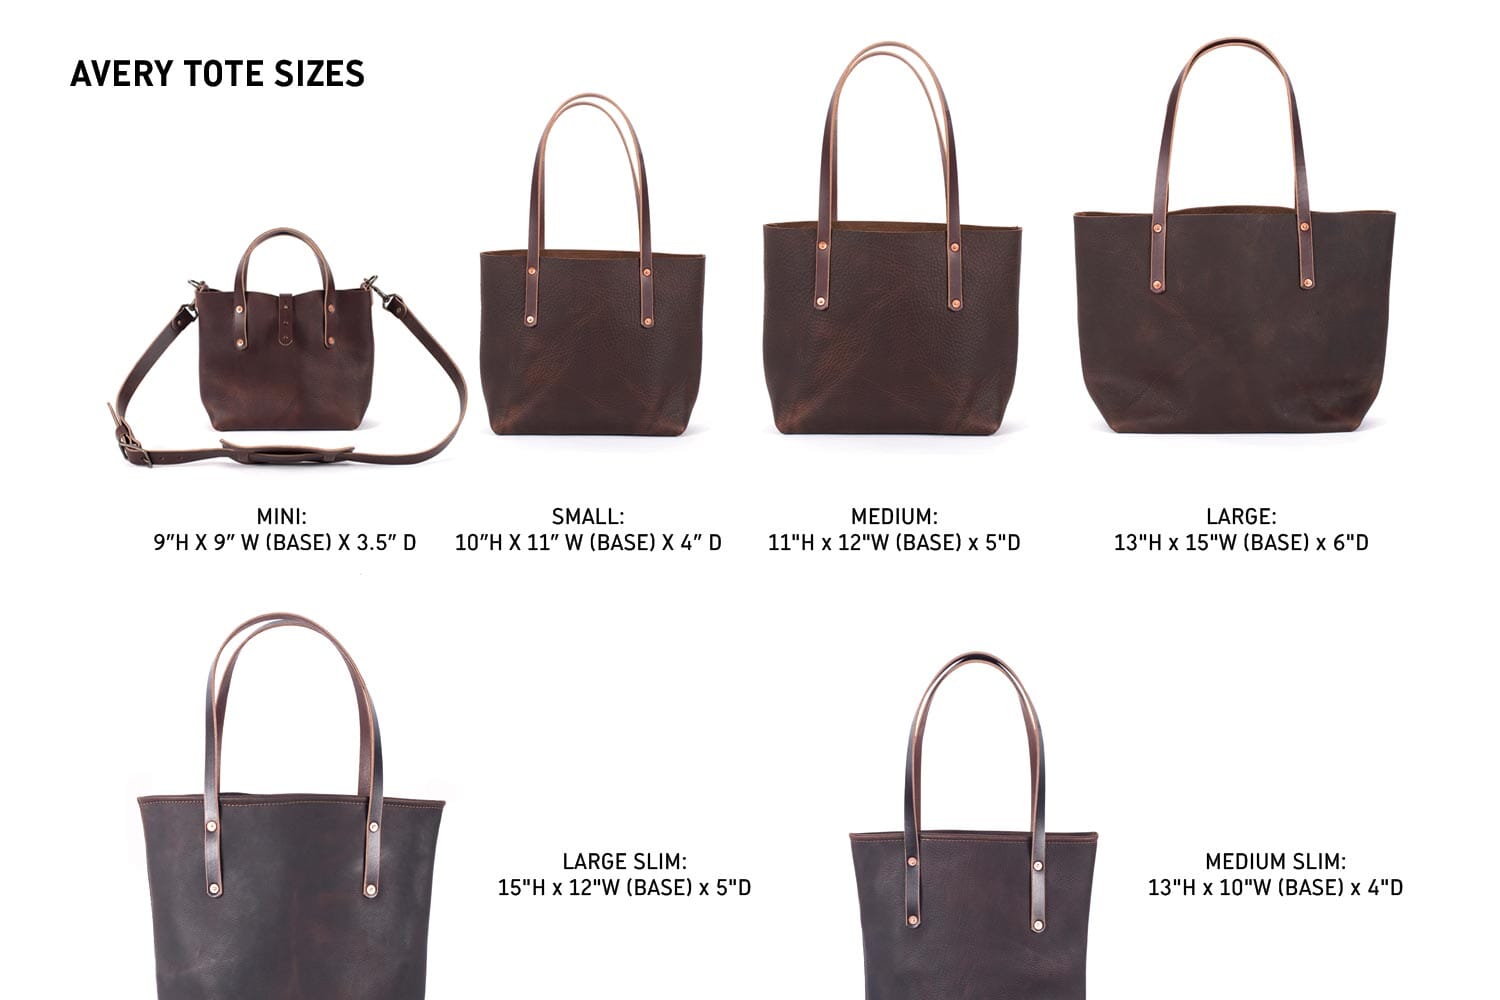 AVERY LEATHER TOTE BAG - MEDIUM WOMANS MARKET TOTE BAG